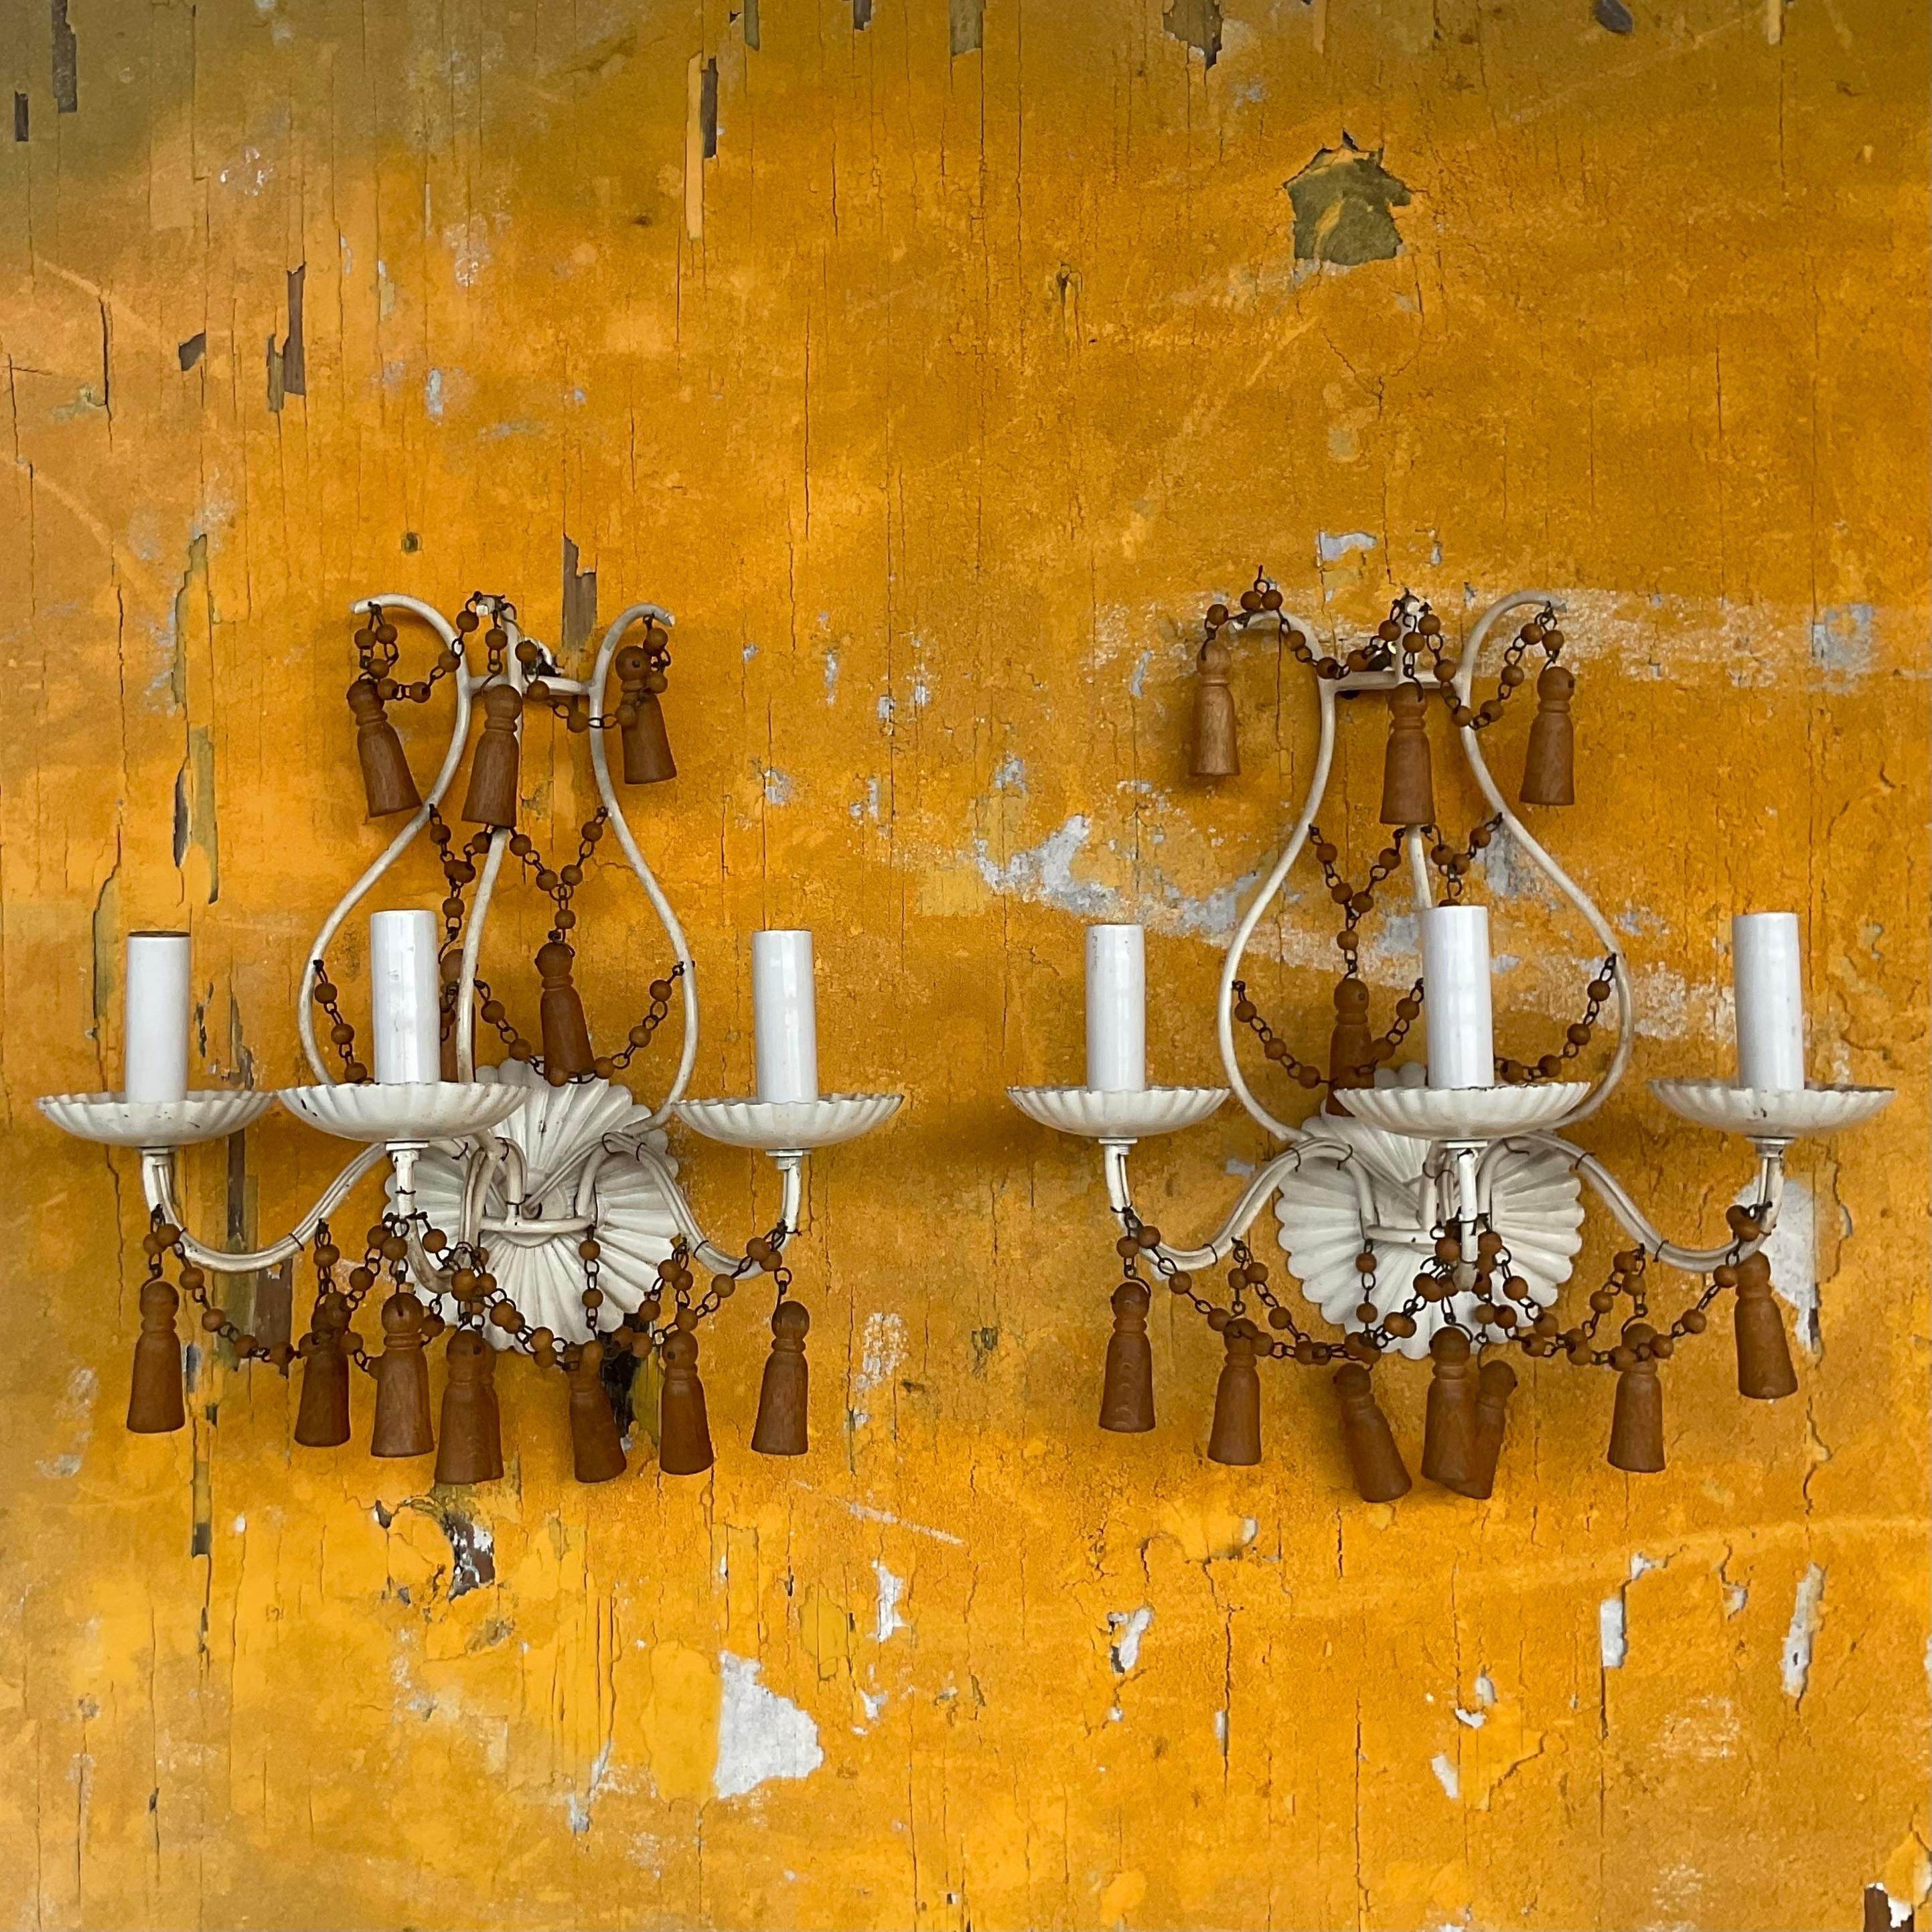 American Early 20th Century Vintage Boho Wooden Teardrop Wall Sconces - a Pair For Sale